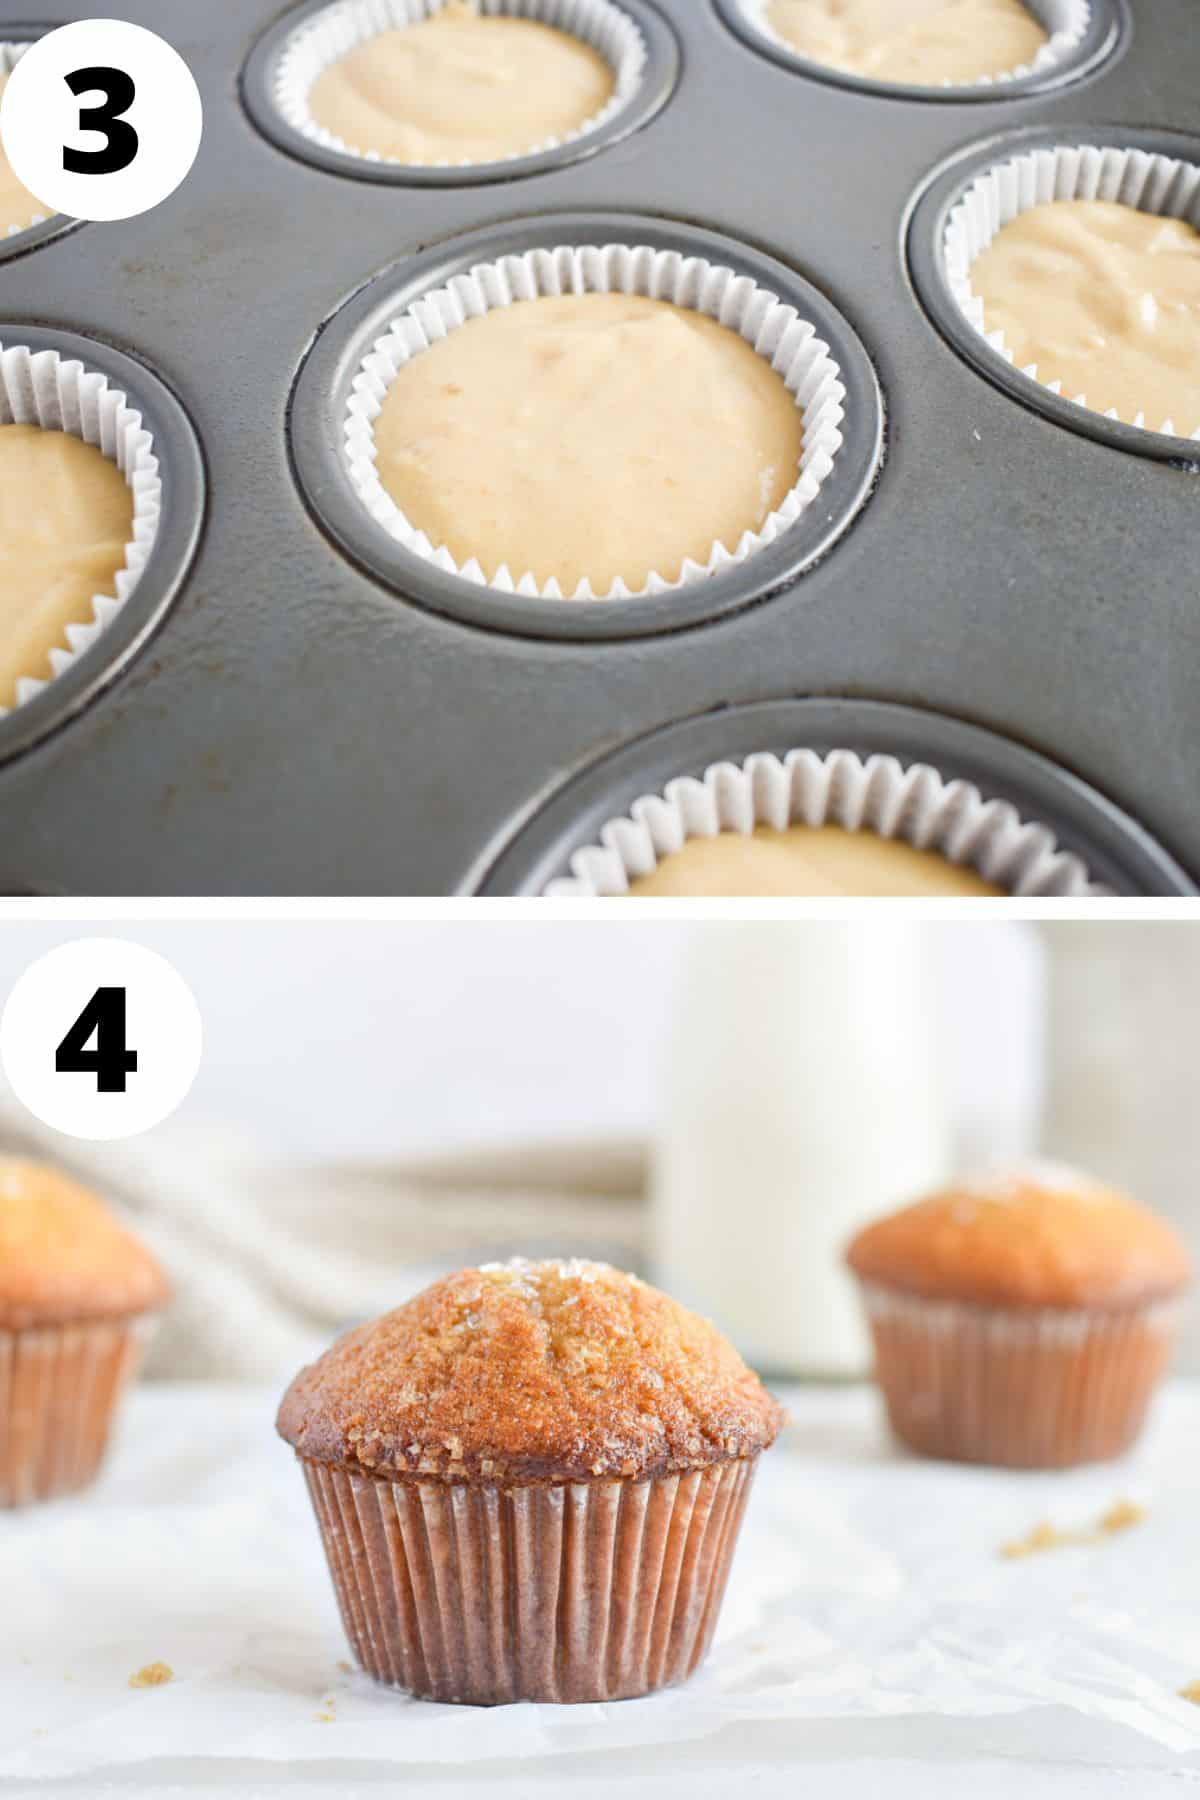 two images showing how to scoop batter and bake muffins. 